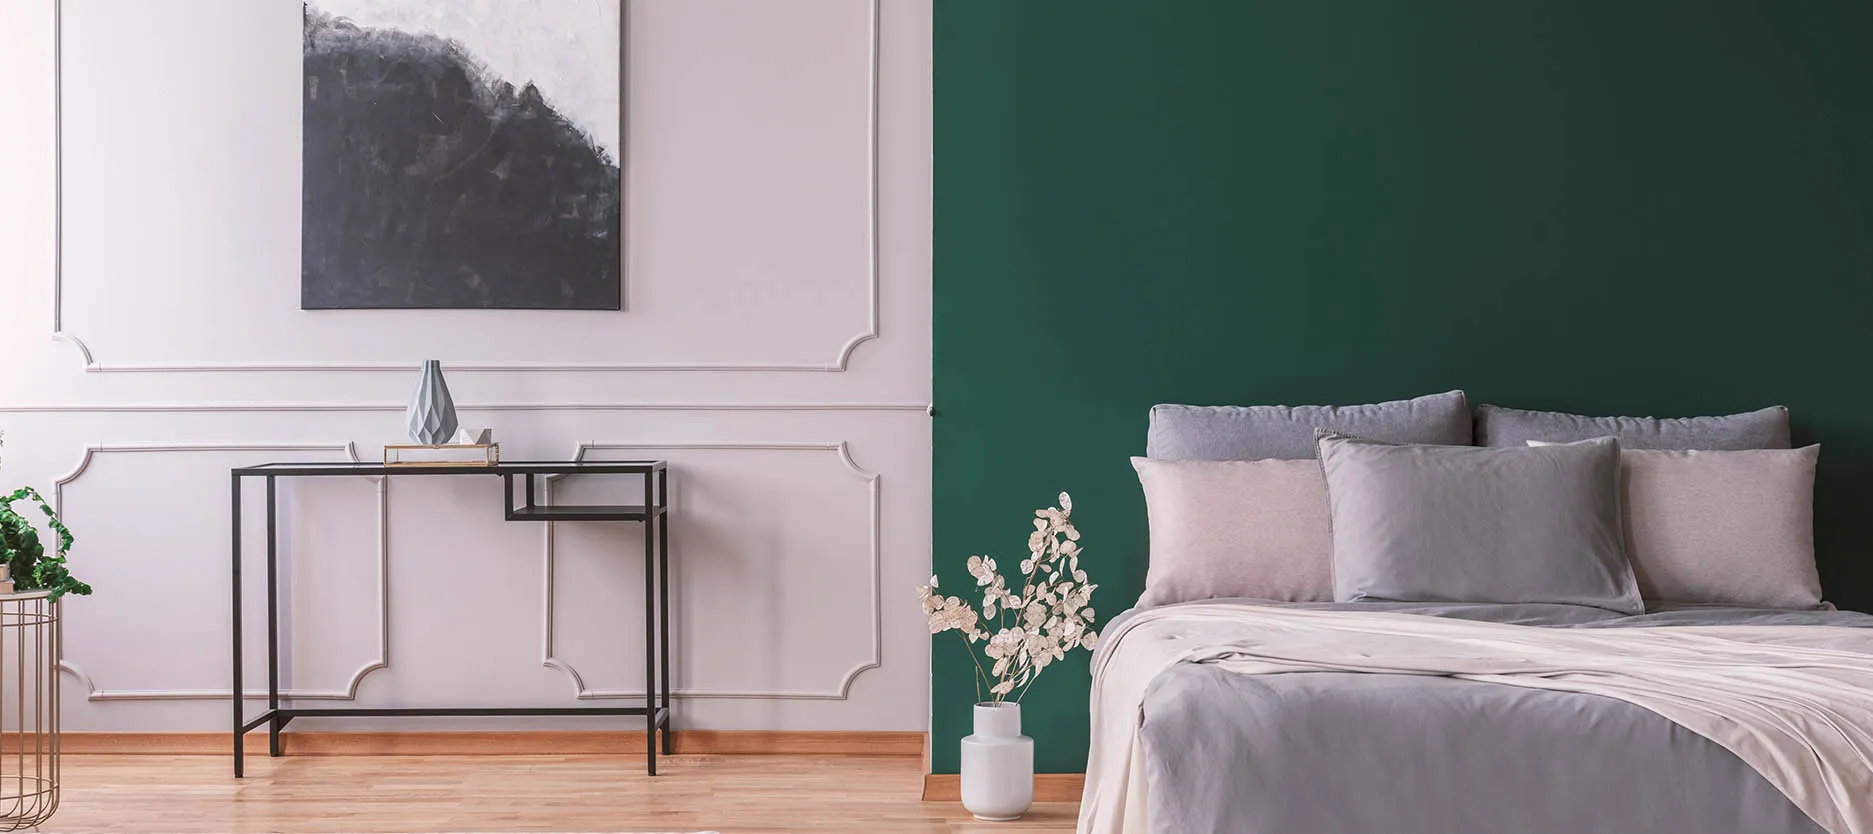 Bottle green and ash grey two colour combination for bedroom walls